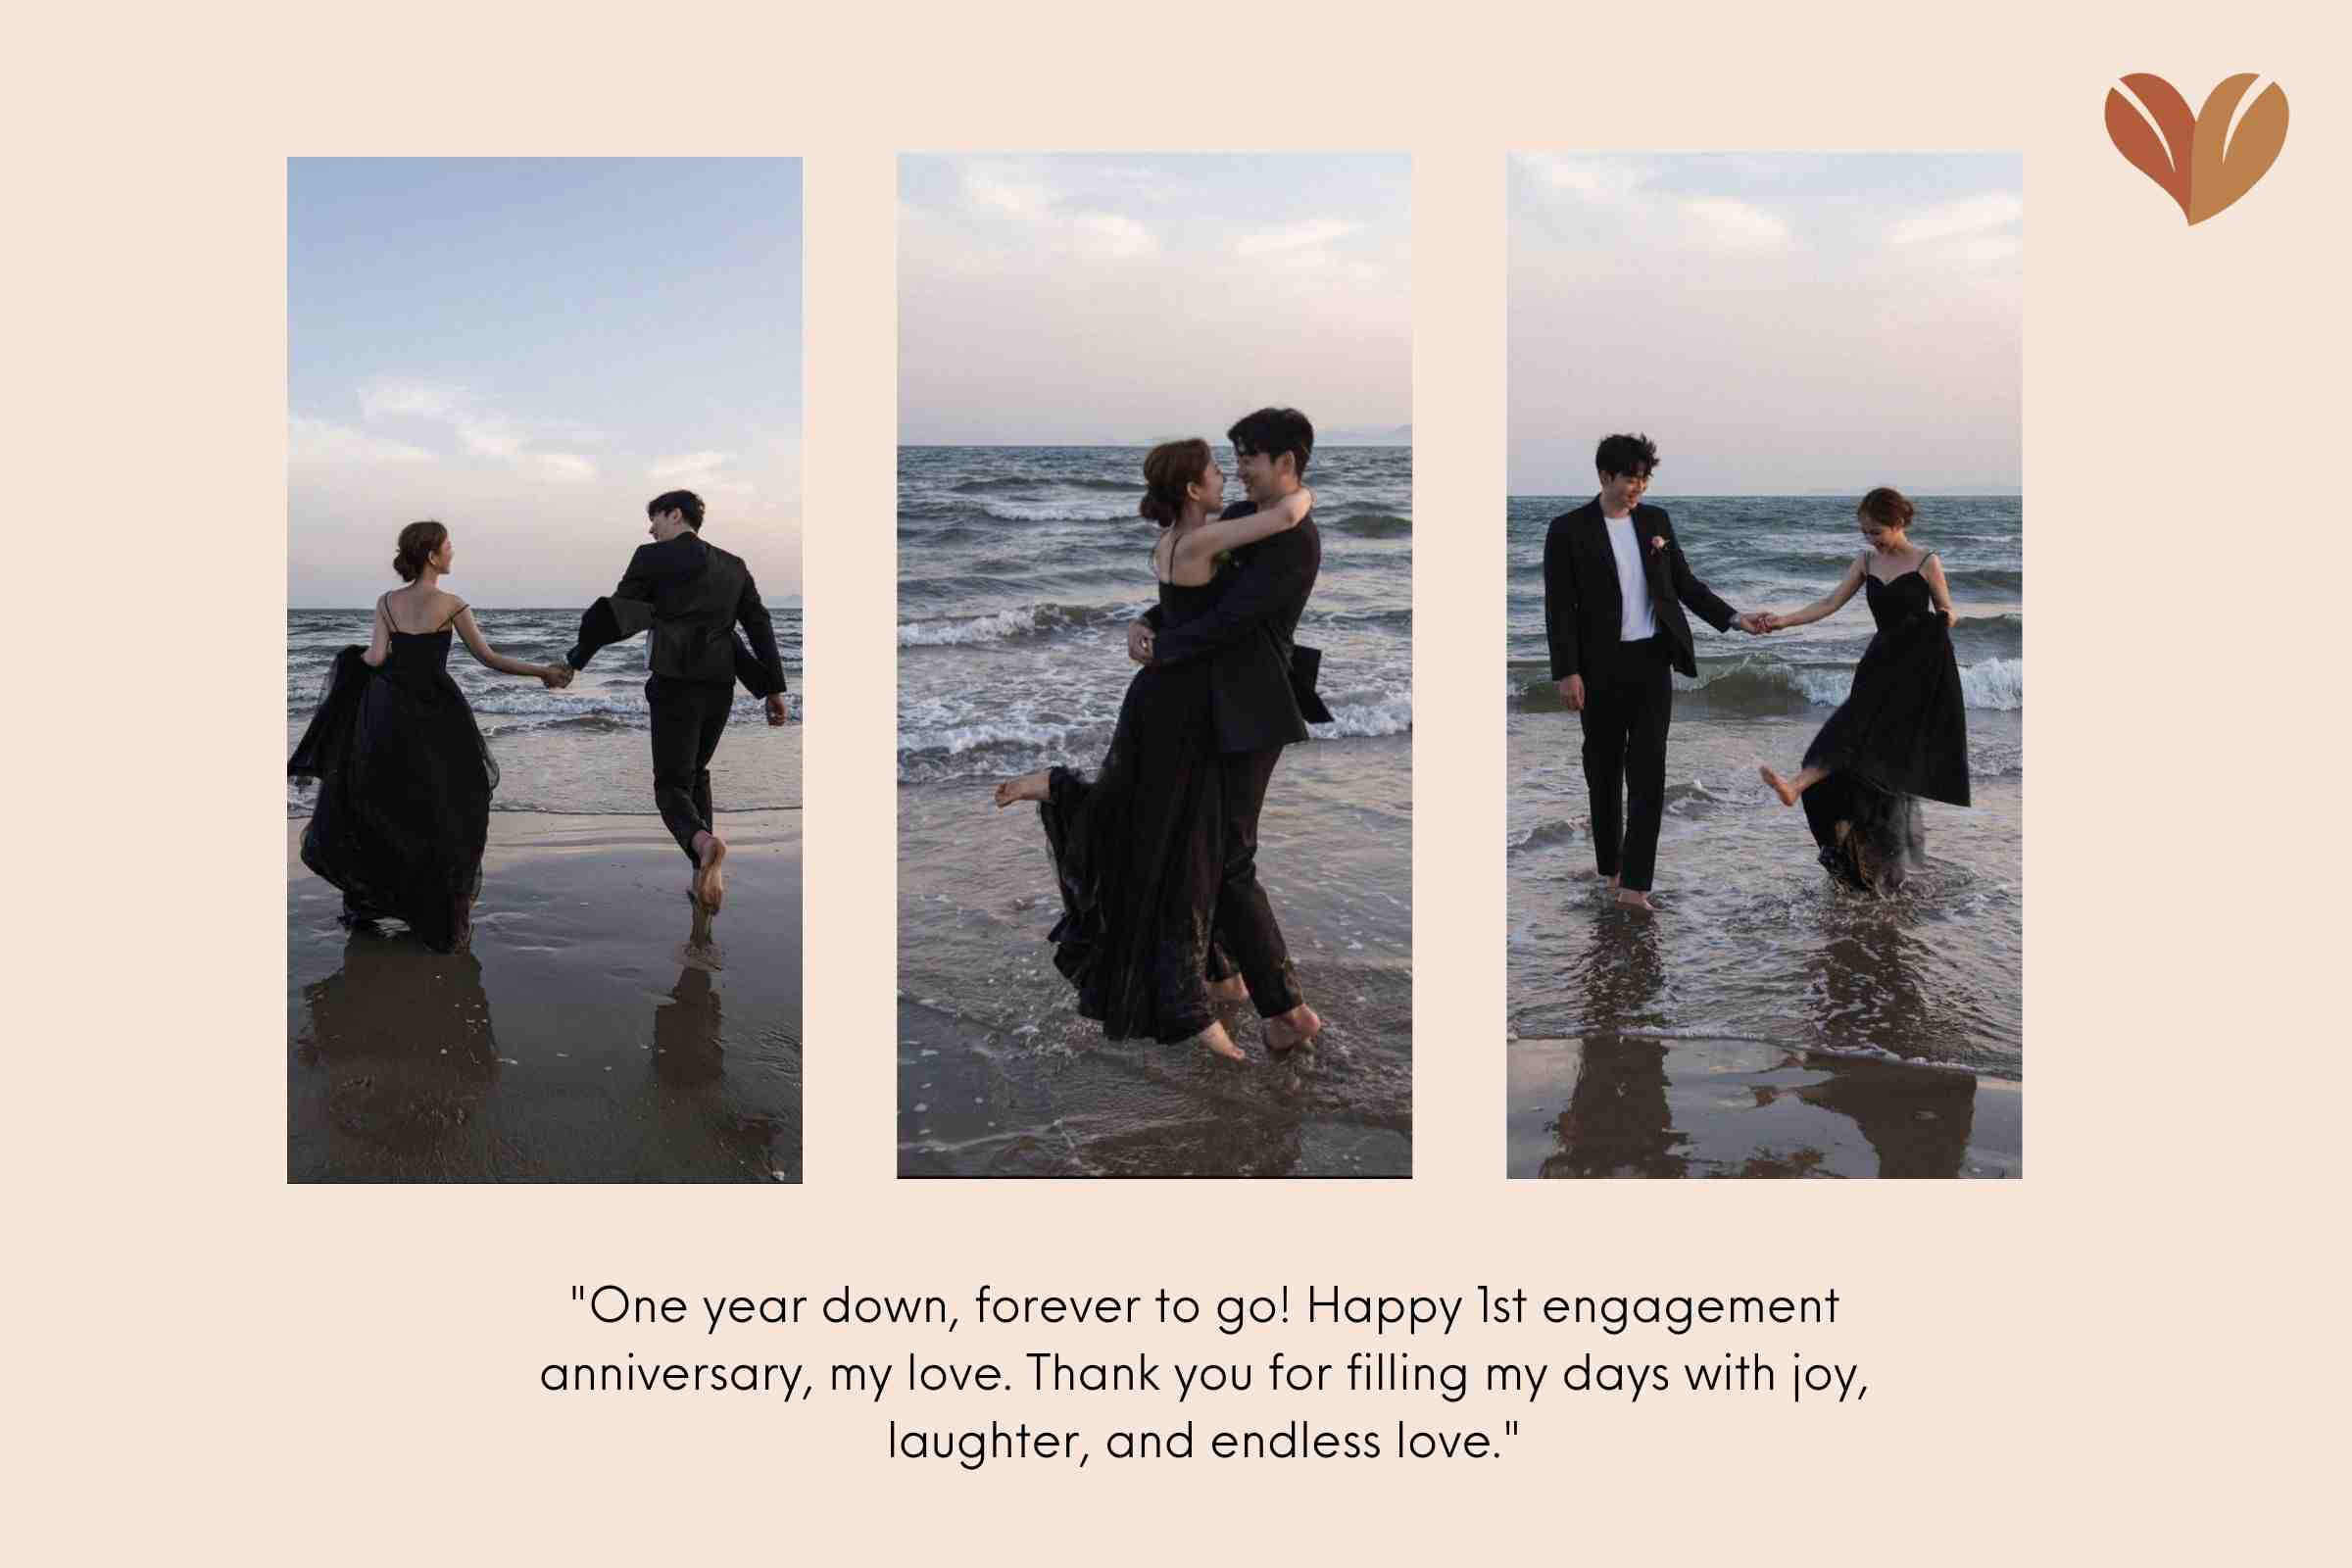 "One year down, forever to go! Happy 1st engagement anniversary, my love. Thank you for filling my days with joy, laughter, and endless love."